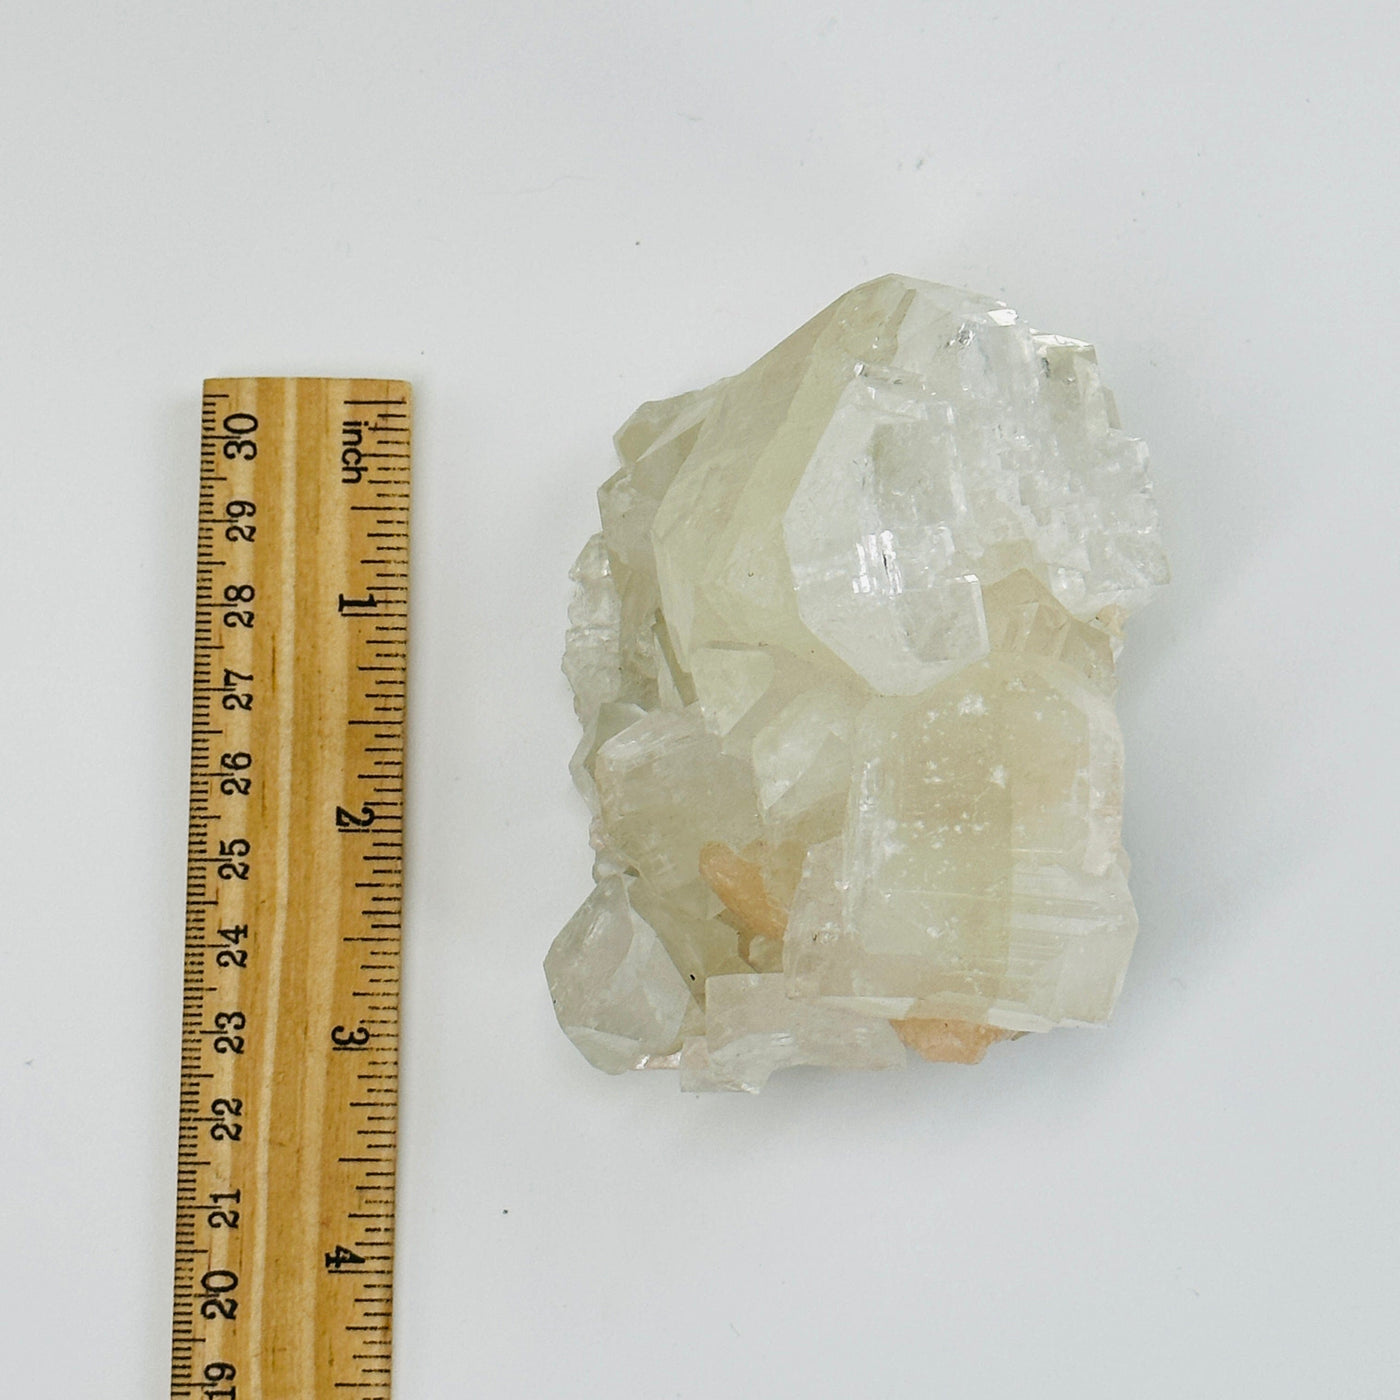 apophyllite with calcite cluster next to a ruler for size reference